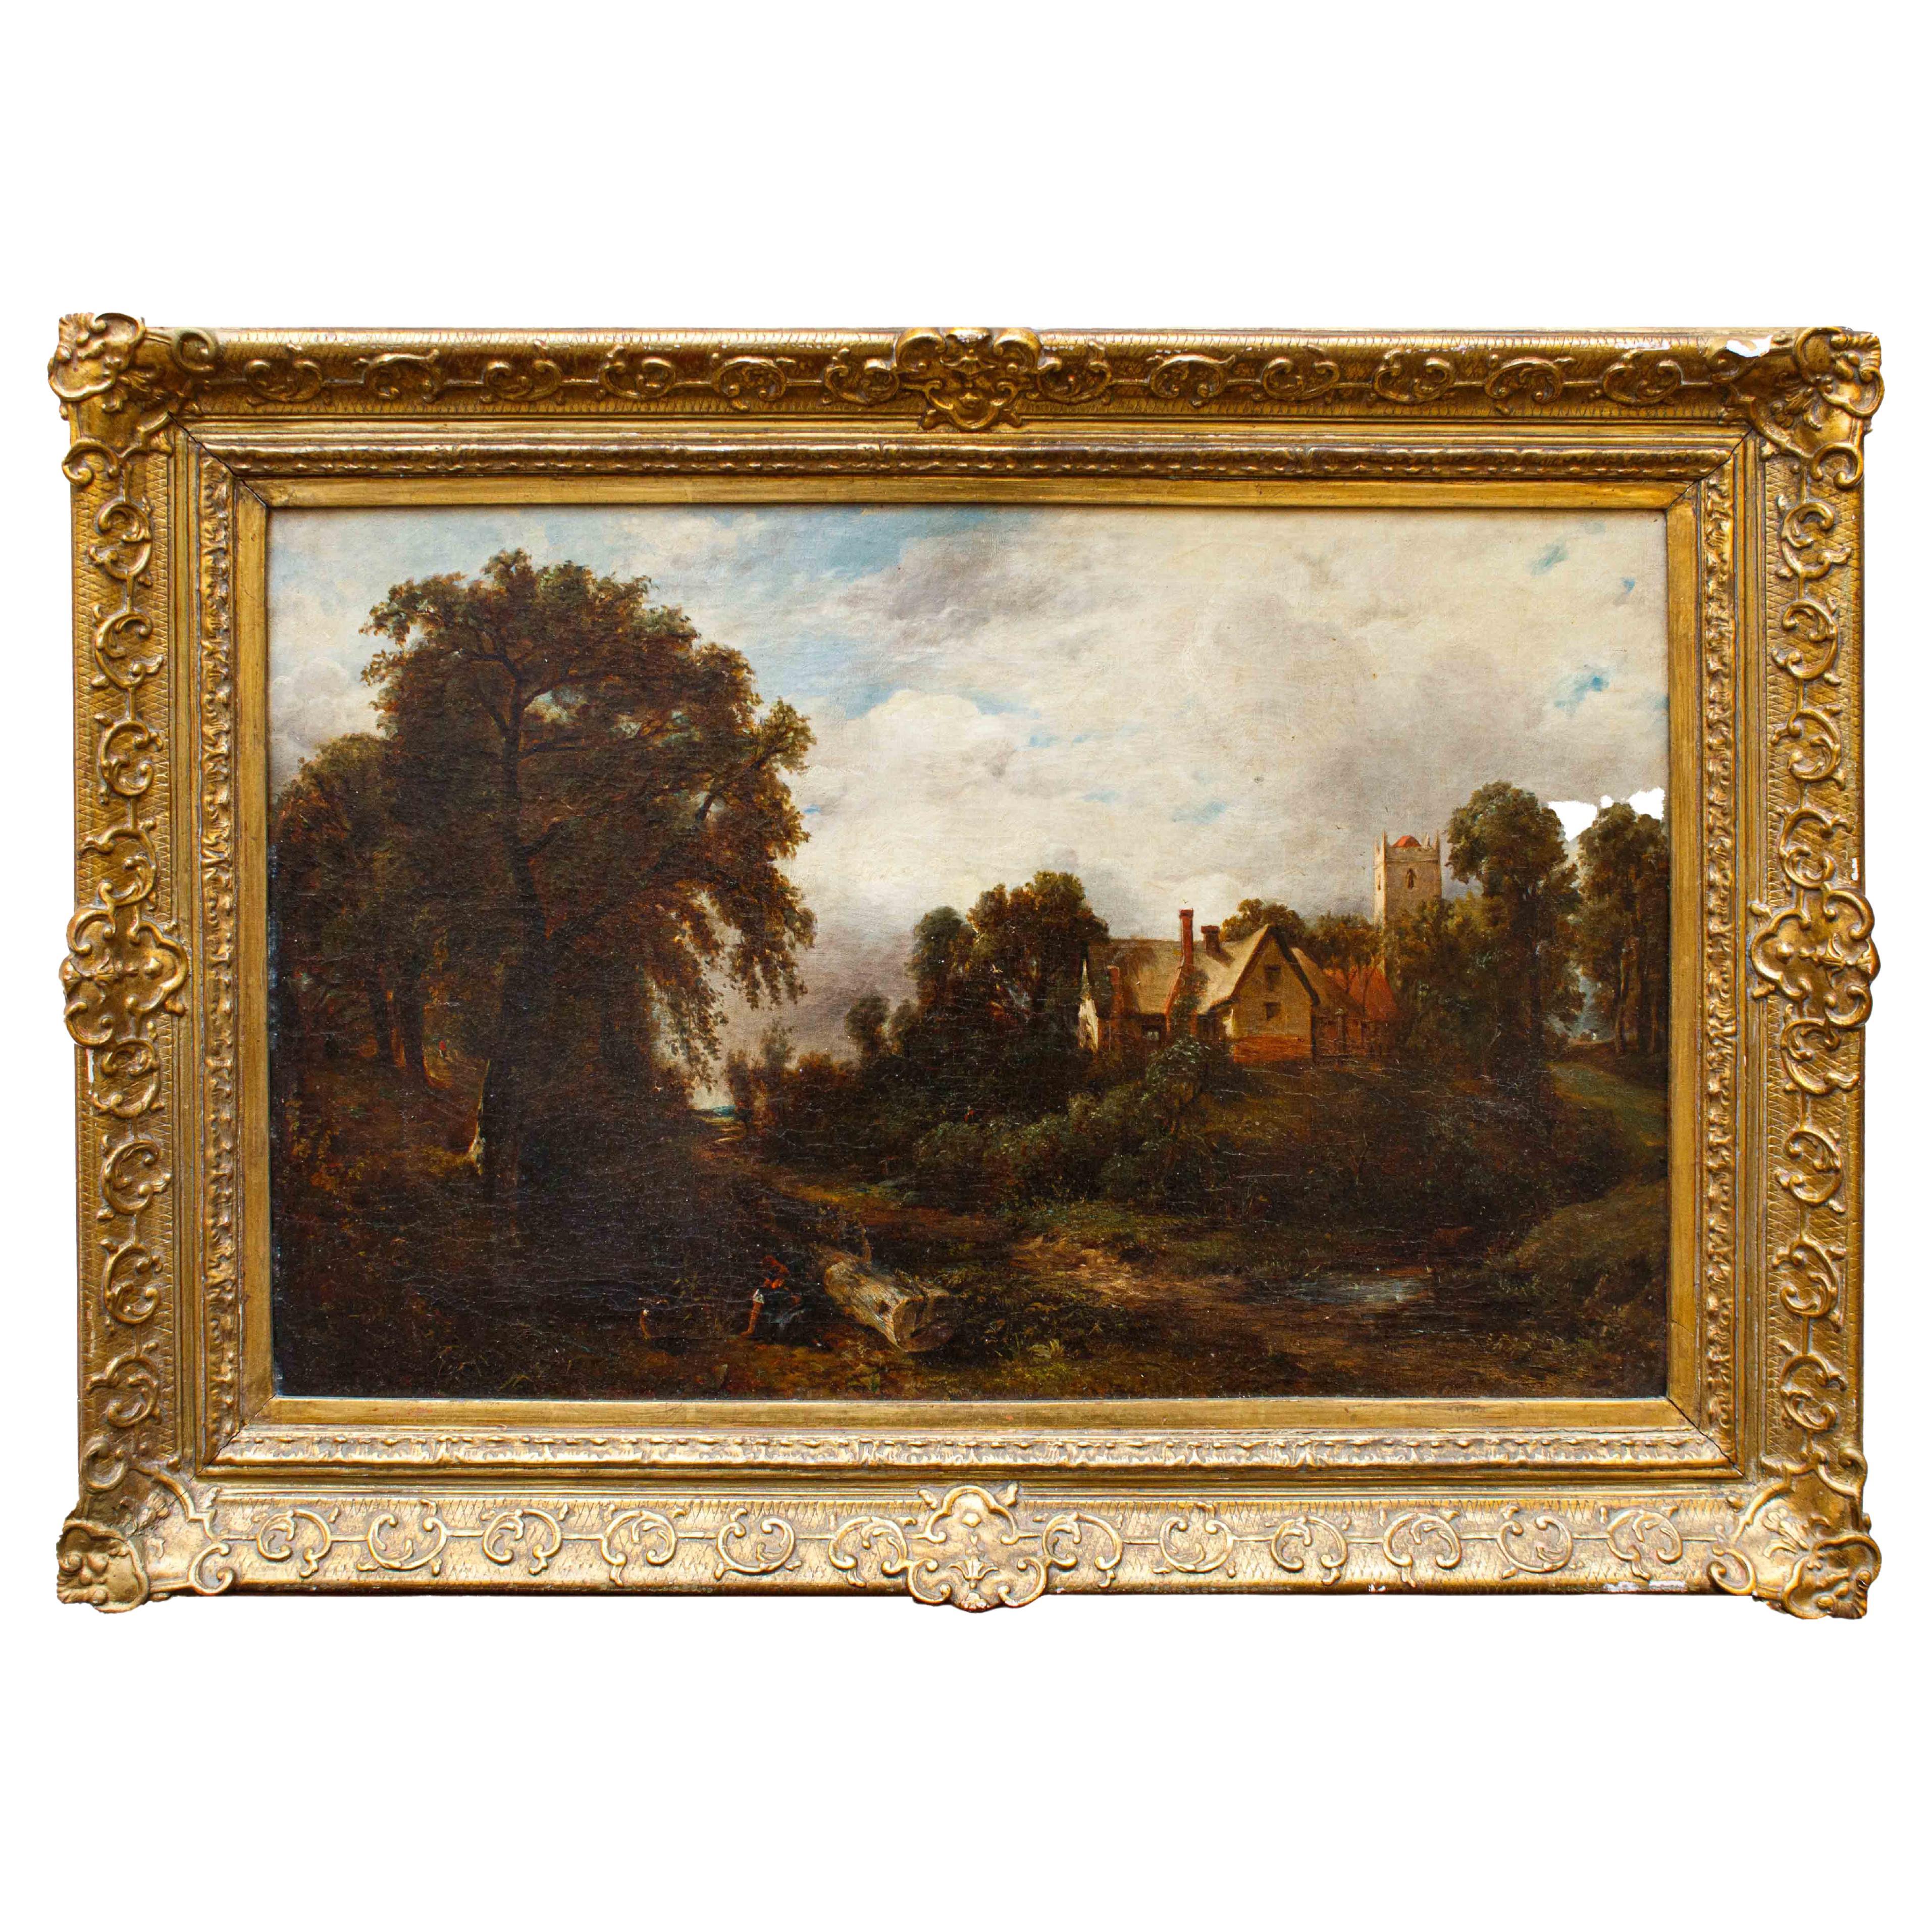 19th Century English Landscape Painting Oil on Canvas